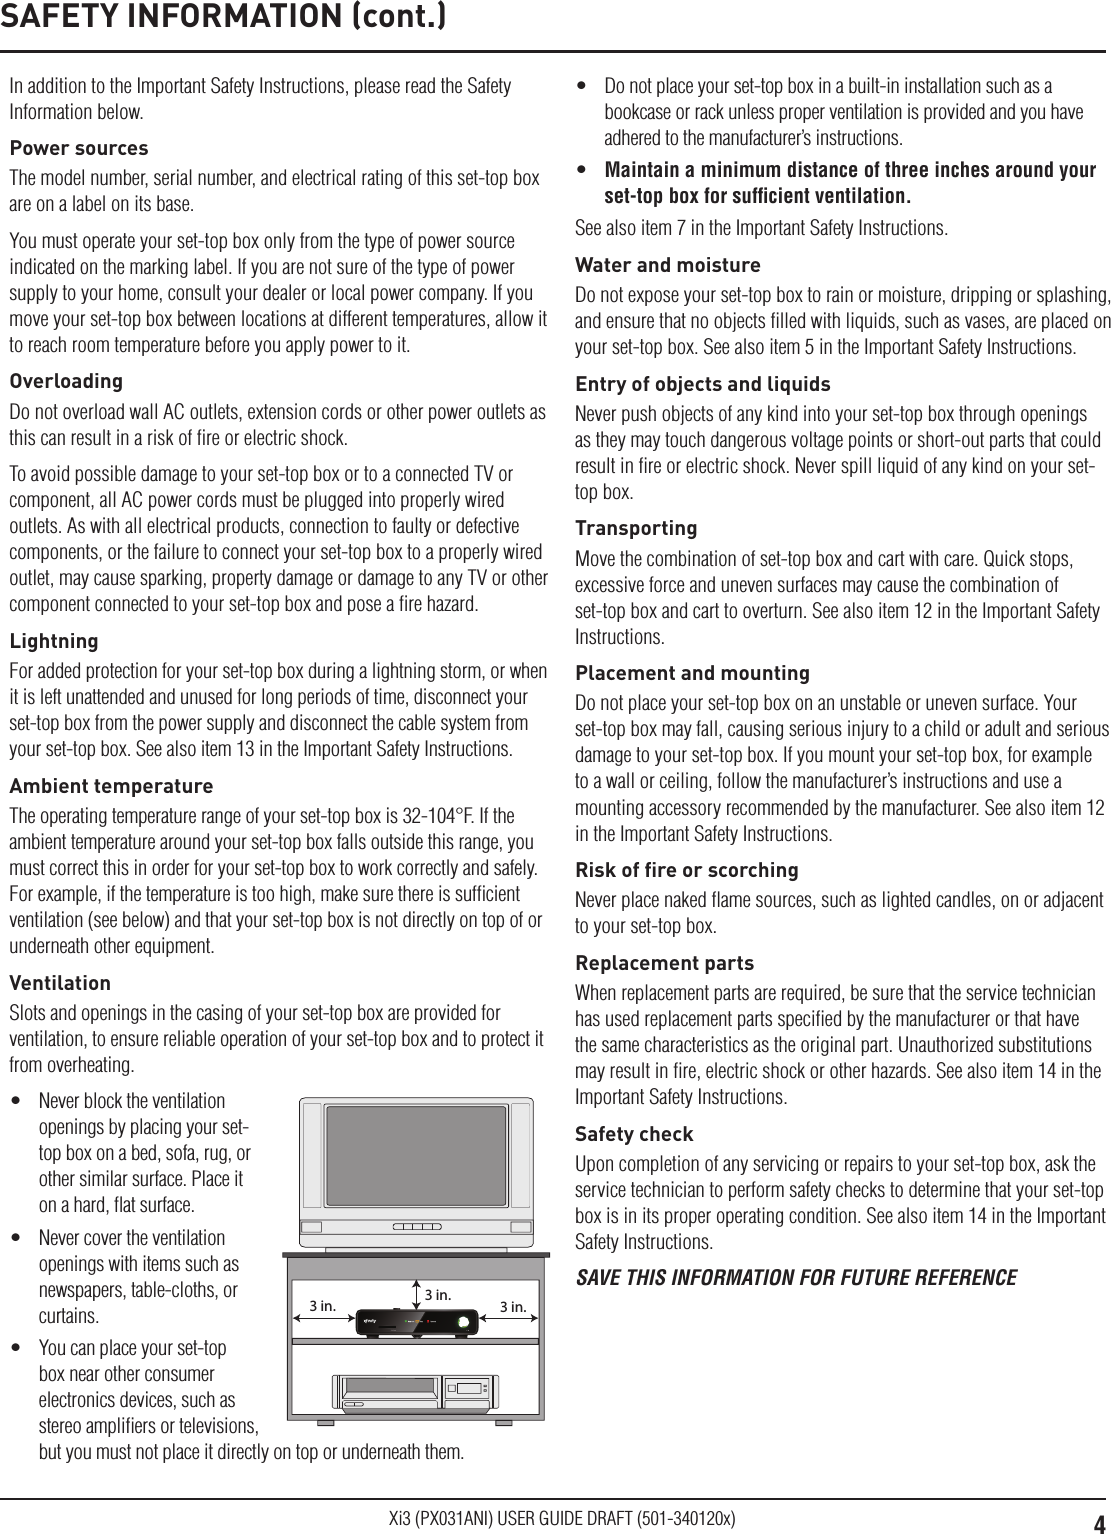 4Xi3 (PX031ANI) USER GUIDE DRAFT (501-340120x)In addition to the Important Safety Instructions, please read the Safety Information below.Power sourcesThe model number, serial number, and electrical rating of this set-top box are on a label on its base.You must operate your set-top box only from the type of power source indicated on the marking label. If you are not sure of the type of power supply to your home, consult your dealer or local power company. If you move your set-top box between locations at different temperatures, allow it to reach room temperature before you apply power to it.OverloadingDo not overload wall AC outlets, extension cords or other power outlets as this can result in a risk of ﬁre or electric shock.To avoid possible damage to your set-top box or to a connected TV or component, all AC power cords must be plugged into properly wired outlets. As with all electrical products, connection to faulty or defective components, or the failure to connect your set-top box to a properly wired outlet, may cause sparking, property damage or damage to any TV or other component connected to your set-top box and pose a ﬁre hazard.LightningFor added protection for your set-top box during a lightning storm, or when it is left unattended and unused for long periods of time, disconnect your set-top box from the power supply and disconnect the cable system from your set-top box. See also item 13 in the Important Safety Instructions.Ambient temperatureThe operating temperature range of your set-top box is 32-104°F. If the ambient temperature around your set-top box falls outside this range, you must correct this in order for your set-top box to work correctly and safely. For example, if the temperature is too high, make sure there is sufﬁcient ventilation (see below) and that your set-top box is not directly on top of or underneath other equipment.VentilationSlots and openings in the casing of your set-top box are provided for ventilation, to ensure reliable operation of your set-top box and to protect it from overheating.•  Never block the ventilation openings by placing your set-top box on a bed, sofa, rug, or other similar surface. Place it on a hard, ﬂat surface.•  Never cover the ventilation openings with items such as newspapers, table-cloths, or curtains.•  You can place your set-top box near other consumer electronics devices, such as stereo ampliﬁers or televisions, but you must not place it directly on top or underneath them.3 in.3 in.3 in.•  Do not place your set-top box in a built-in installation such as a bookcase or rack unless proper ventilation is provided and you have adhered to the manufacturer’s instructions.•  Maintain a minimum distance of three inches around your set-top box for sufﬁcient ventilation.See also item 7 in the Important Safety Instructions.Water and moistureDo not expose your set-top box to rain or moisture, dripping or splashing, and ensure that no objects ﬁlled with liquids, such as vases, are placed on your set-top box. See also item 5 in the Important Safety Instructions.Entry of objects and liquidsNever push objects of any kind into your set-top box through openings as they may touch dangerous voltage points or short-out parts that could result in ﬁre or electric shock. Never spill liquid of any kind on your set-top box.TransportingMove the combination of set-top box and cart with care. Quick stops, excessive force and uneven surfaces may cause the combination of set-top box and cart to overturn. See also item 12 in the Important Safety Instructions.Placement and mountingDo not place your set-top box on an unstable or uneven surface. Your set-top box may fall, causing serious injury to a child or adult and serious damage to your set-top box. If you mount your set-top box, for example to a wall or ceiling, follow the manufacturer’s instructions and use a mounting accessory recommended by the manufacturer. See also item 12 in the Important Safety Instructions.Risk of ﬁre or scorchingNever place naked ﬂame sources, such as lighted candles, on or adjacent to your set-top box.Replacement partsWhen replacement parts are required, be sure that the service technician has used replacement parts speciﬁed by the manufacturer or that have the same characteristics as the original part. Unauthorized substitutions may result in ﬁre, electric shock or other hazards. See also item 14 in the Important Safety Instructions.Safety checkUpon completion of any servicing or repairs to your set-top box, ask the service technician to perform safety checks to determine that your set-top box is in its proper operating condition. See also item 14 in the Important Safety Instructions.SAVE THIS INFORMATION FOR FUTURE REFERENCESAFETY INFORMATION (cont.)